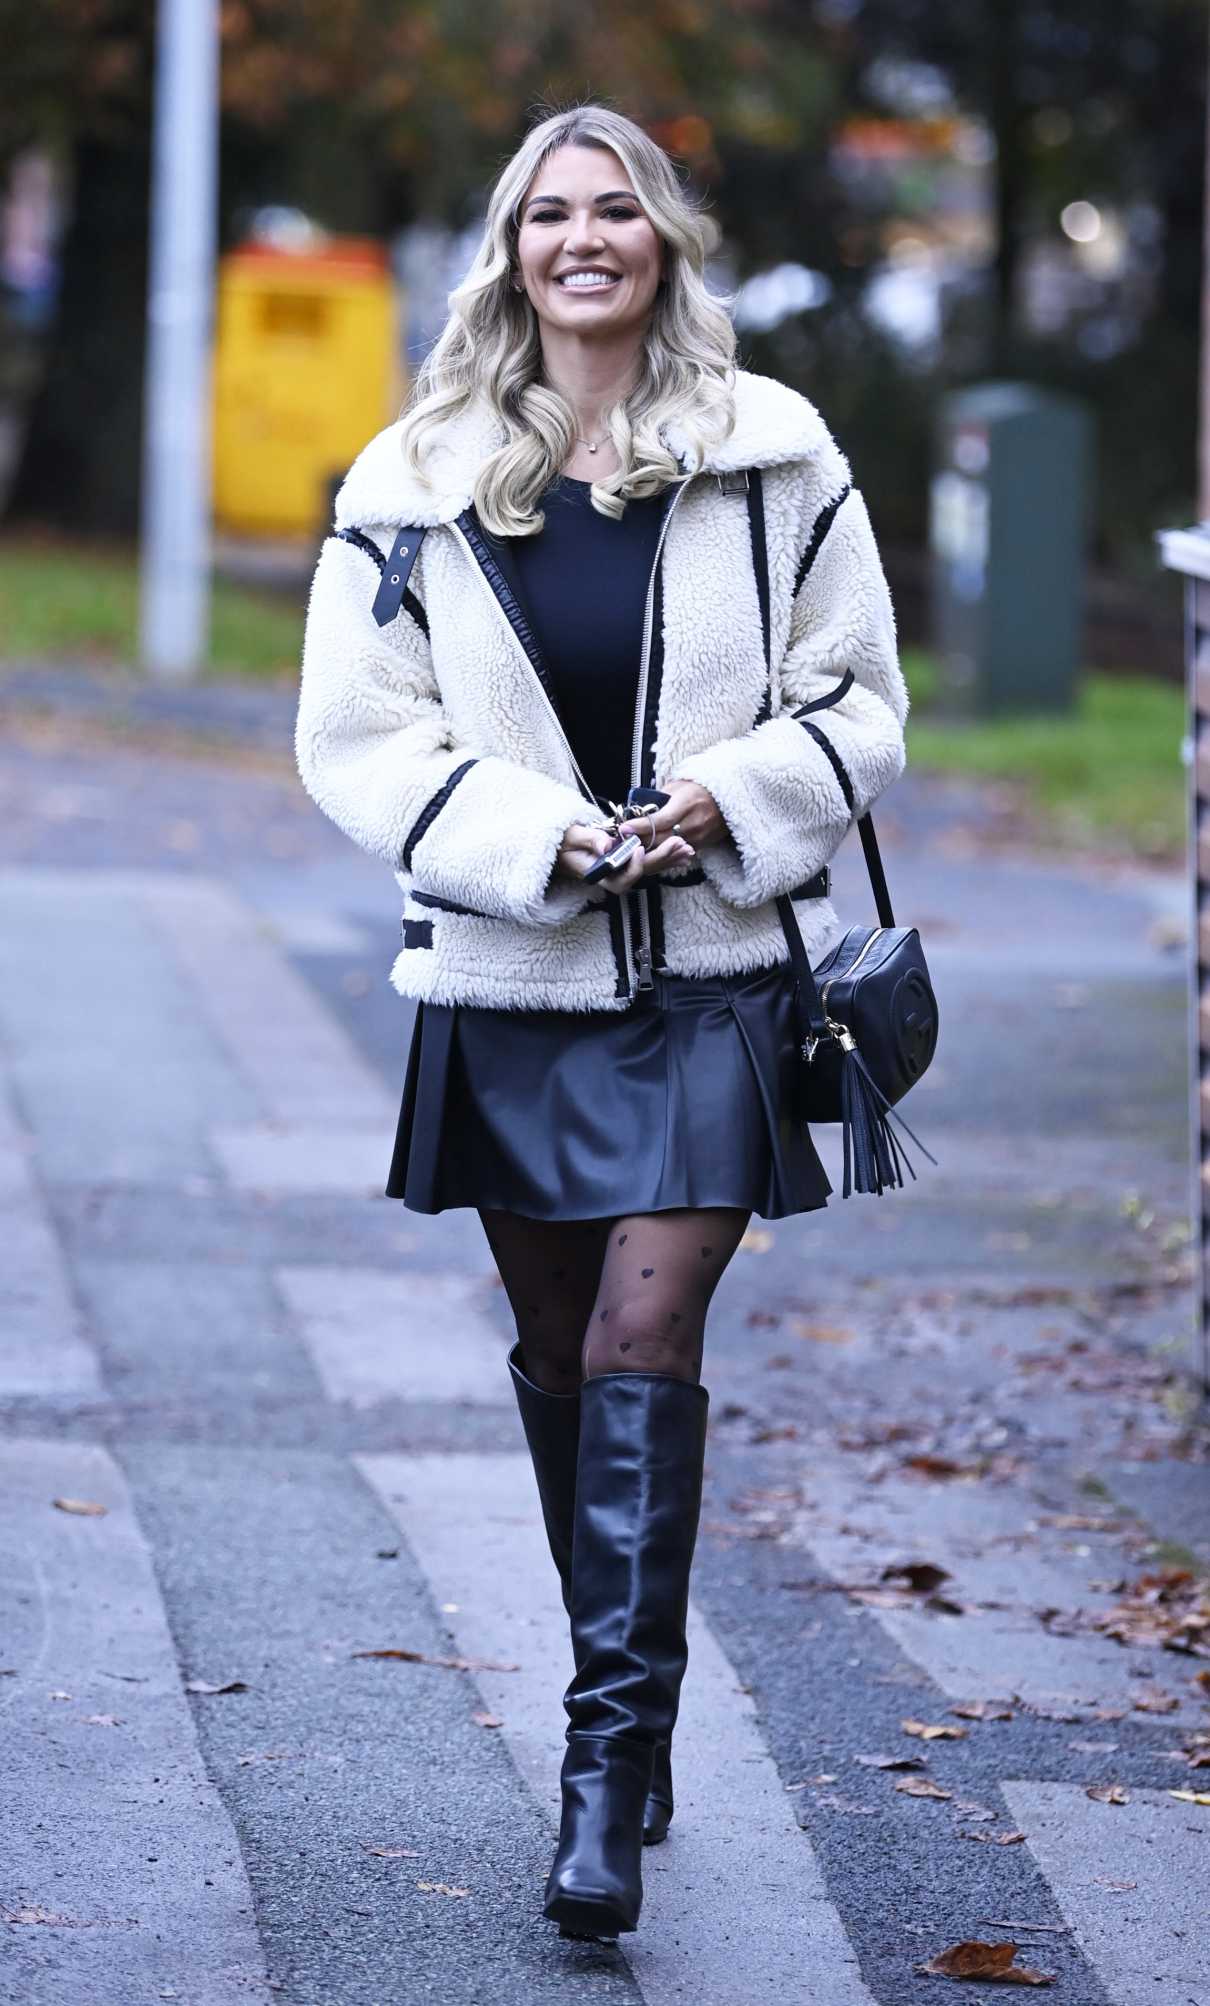 Christine McGuinness in a Black Knee-Length Boots